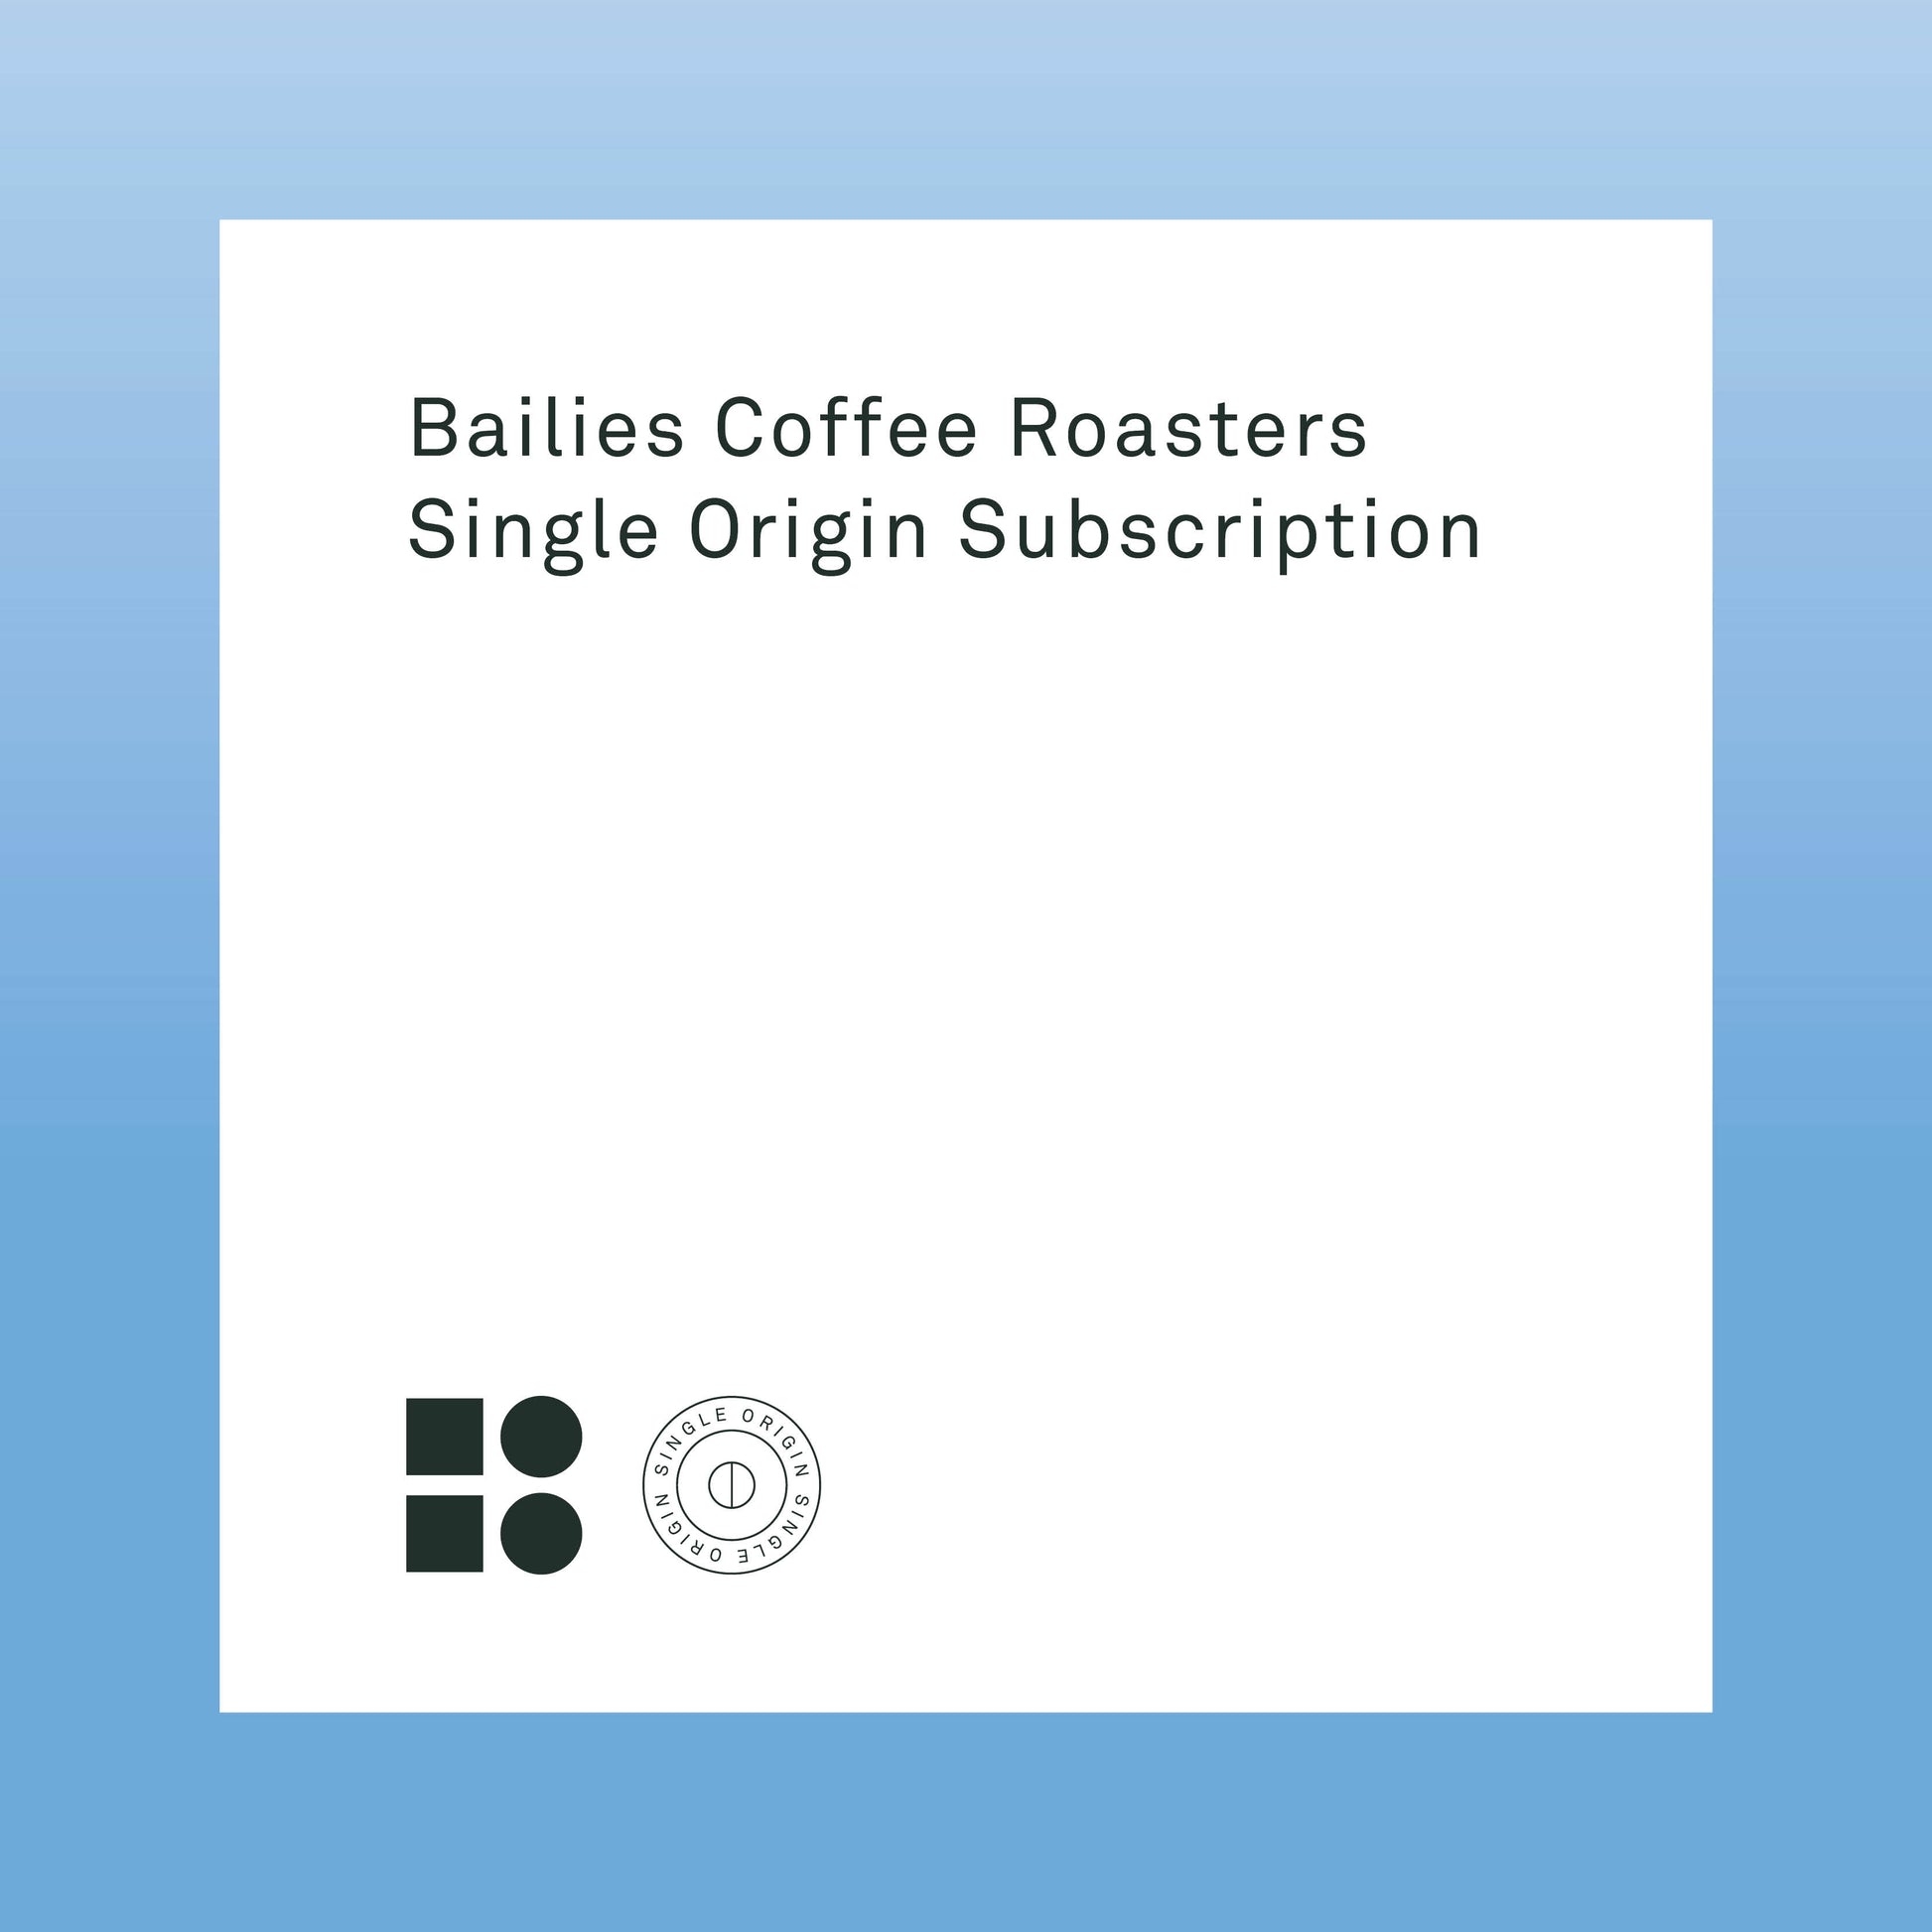 Single Origin Coffee Subscription : Delivery Included - Bailies Coffee Roasters